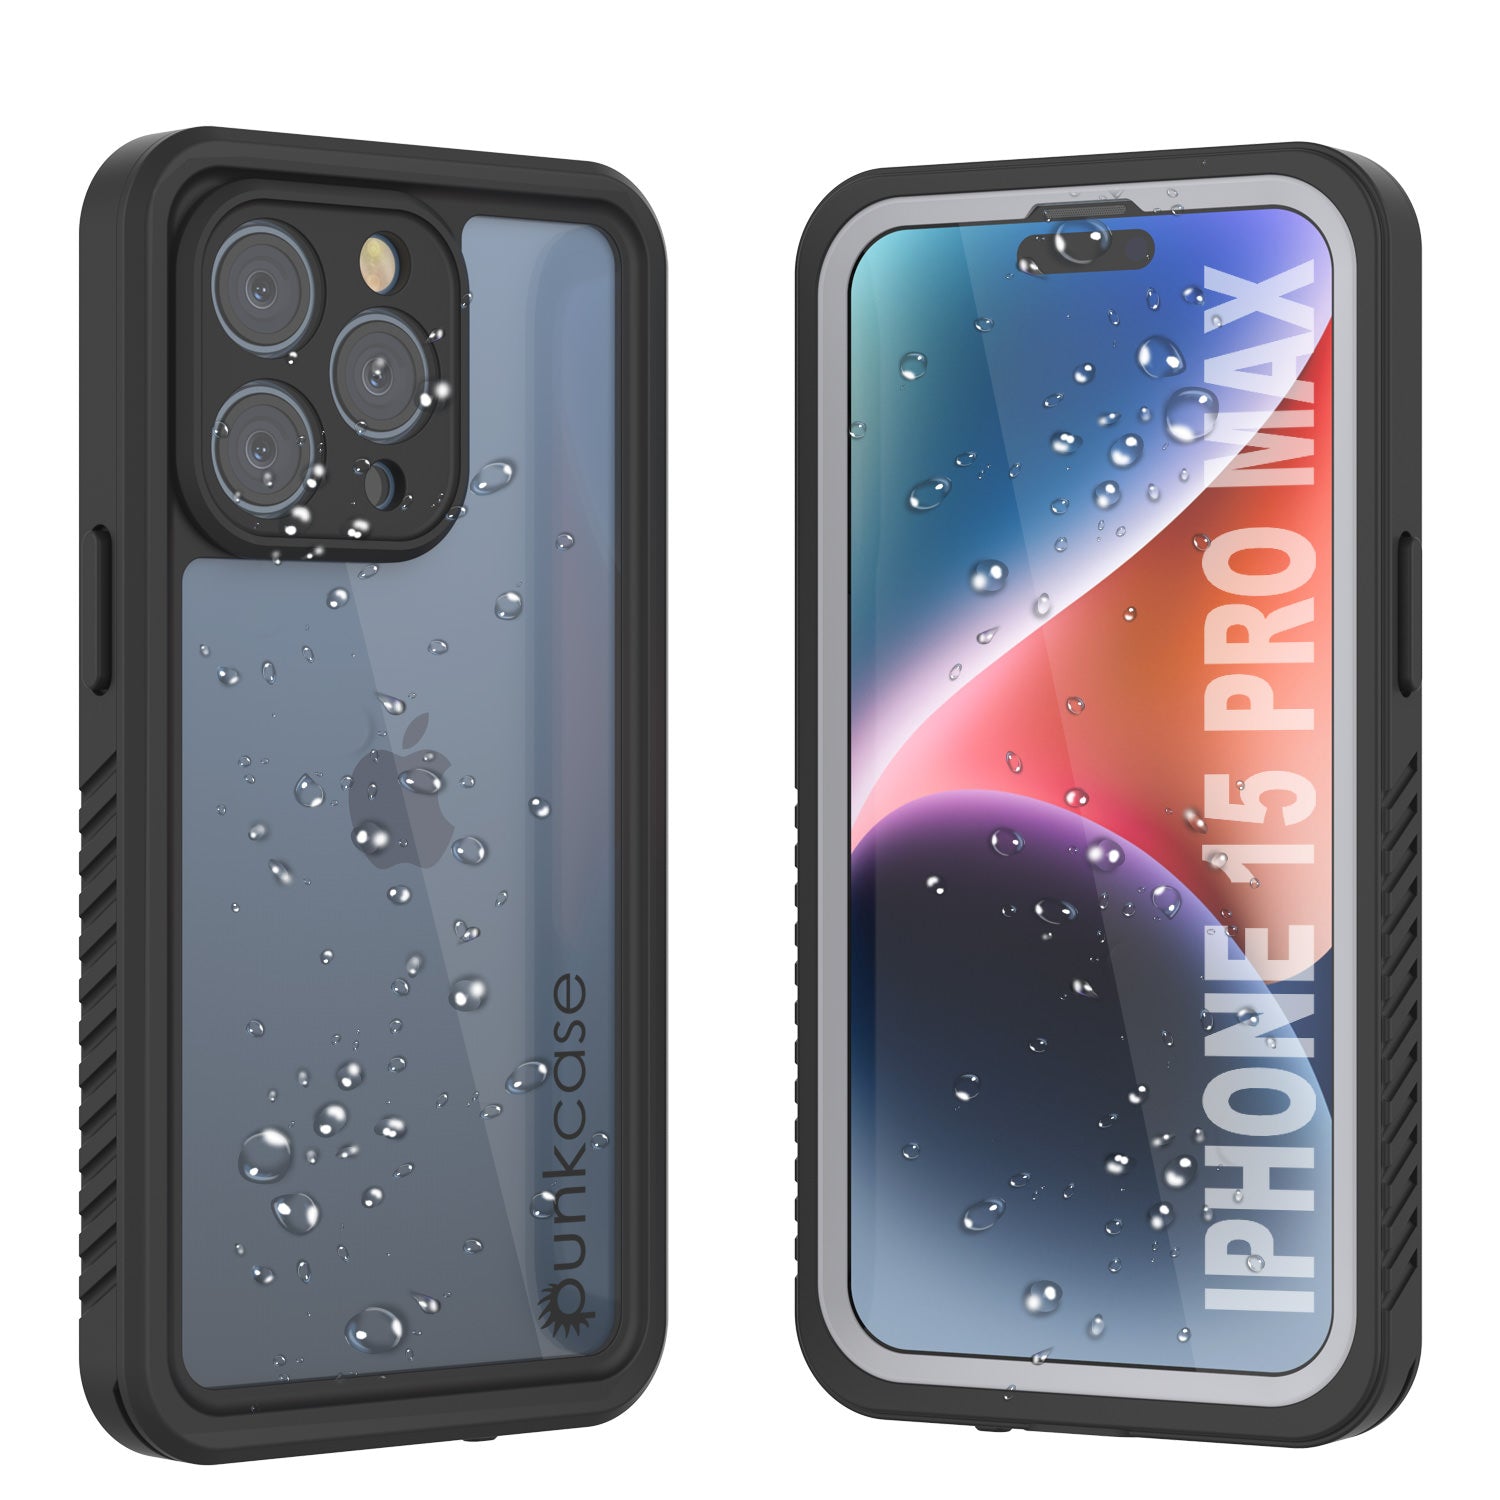 https://www.punkcase.com/cdn/shop/files/iphone-15-pro-max-waterproof-case-punkcase-extreme-series-slim-fit-ip68-certified-shockproof-snowproof-dirtproof-military-grade-rugged-innovative-design-armor-cover-w-built-in-screen_e6619349-e3c9-4012-a04d-fa227ca16ada.jpg?v=1694543156